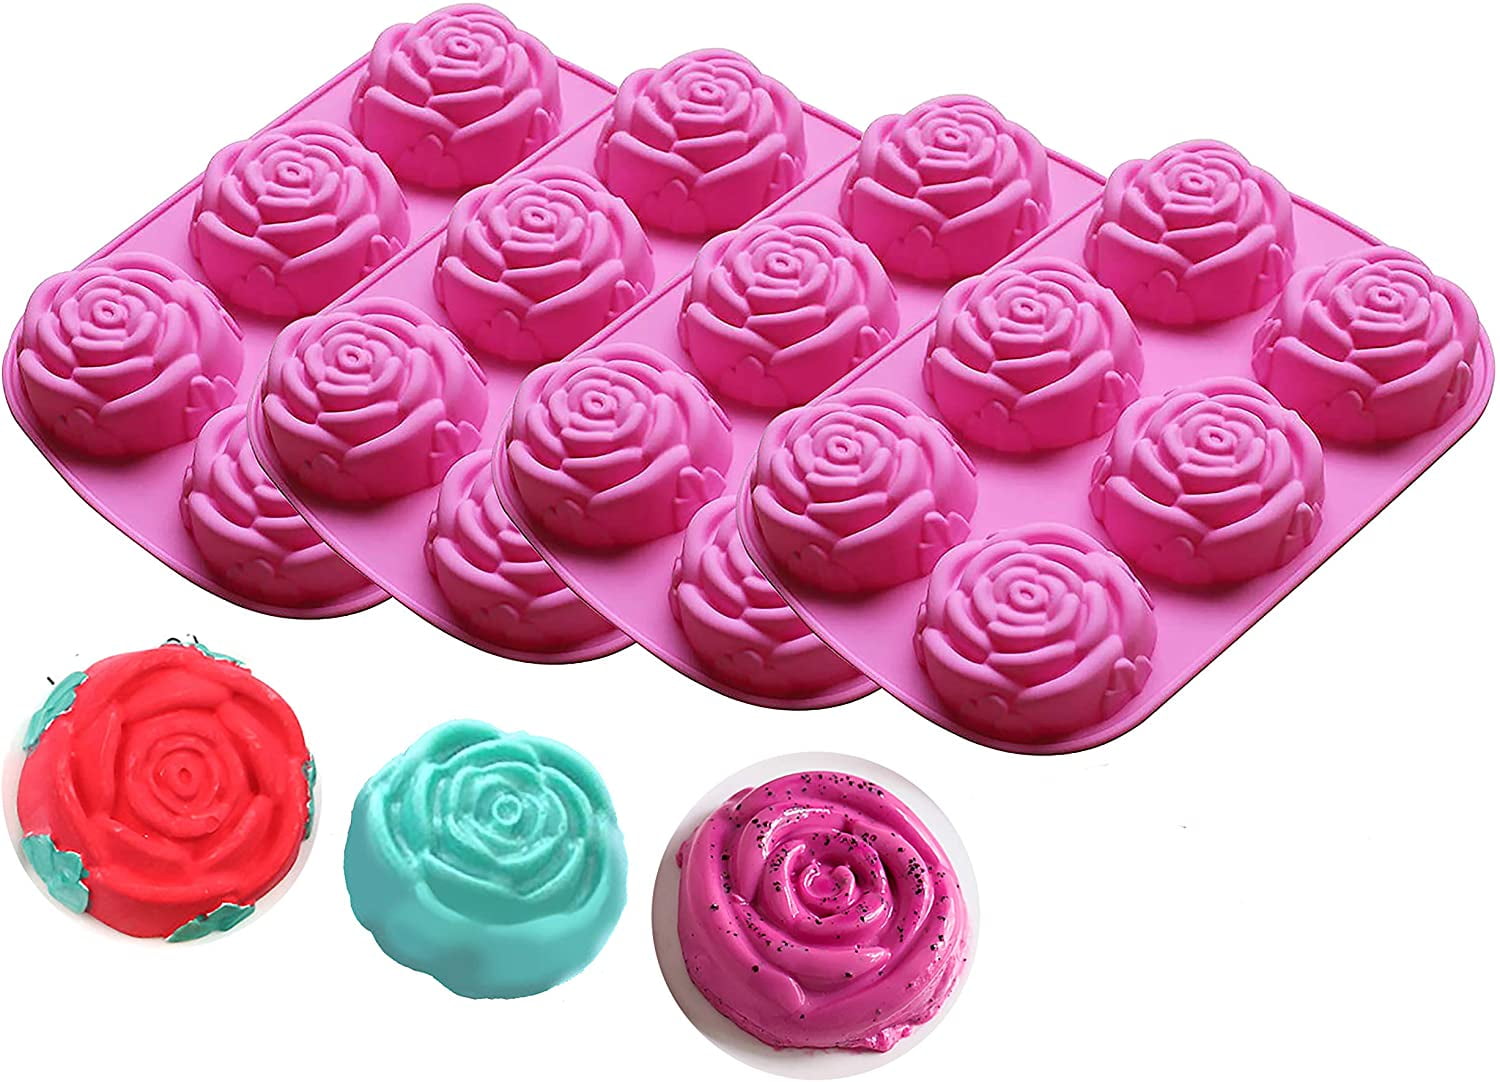 Oblong Rose Floral Soap Mold Flexible Silicone Mould For Candy Ice tray 